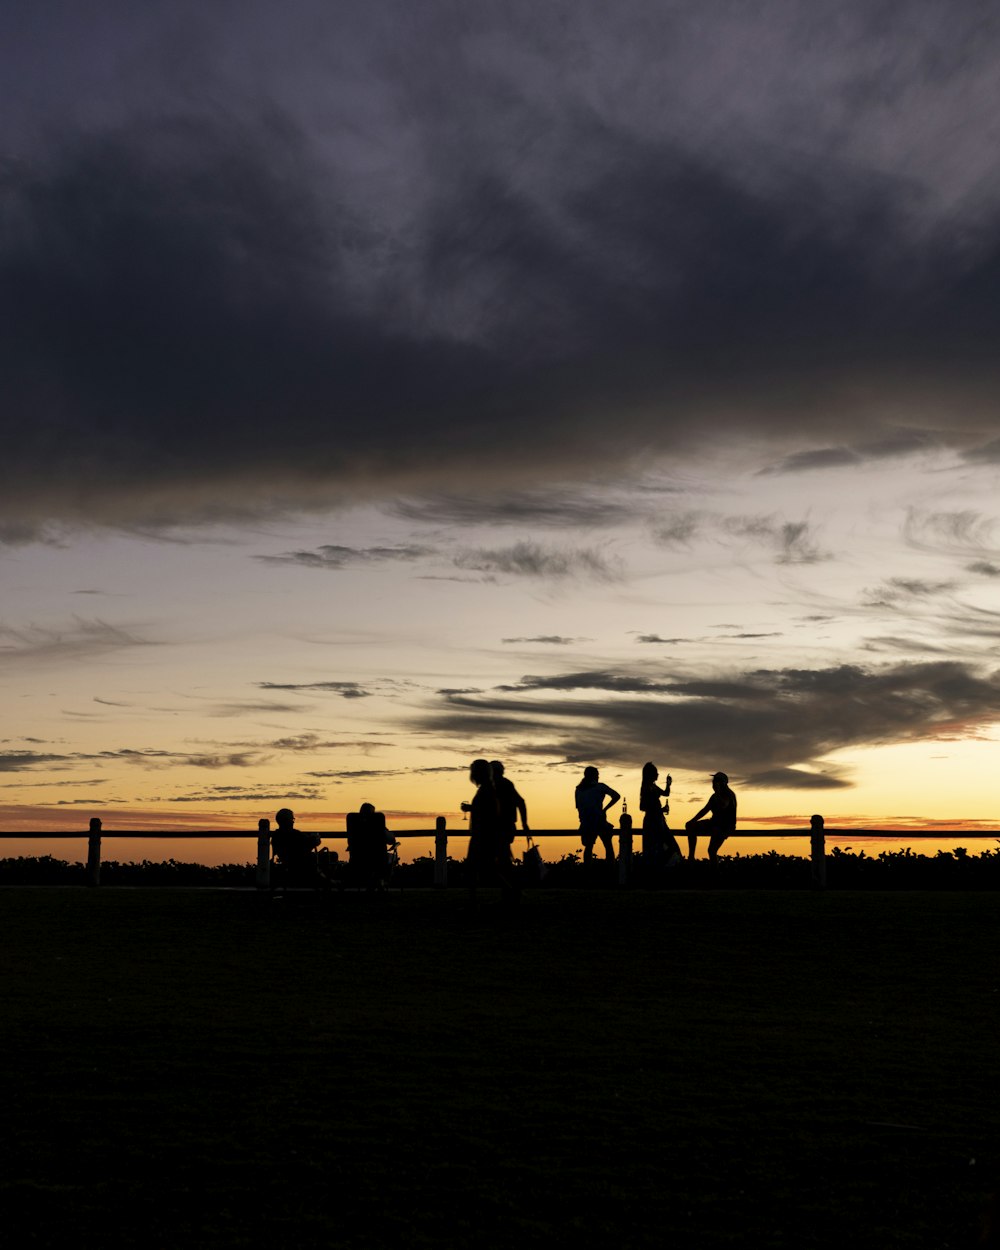 a group of people walking across a field under a cloudy sky